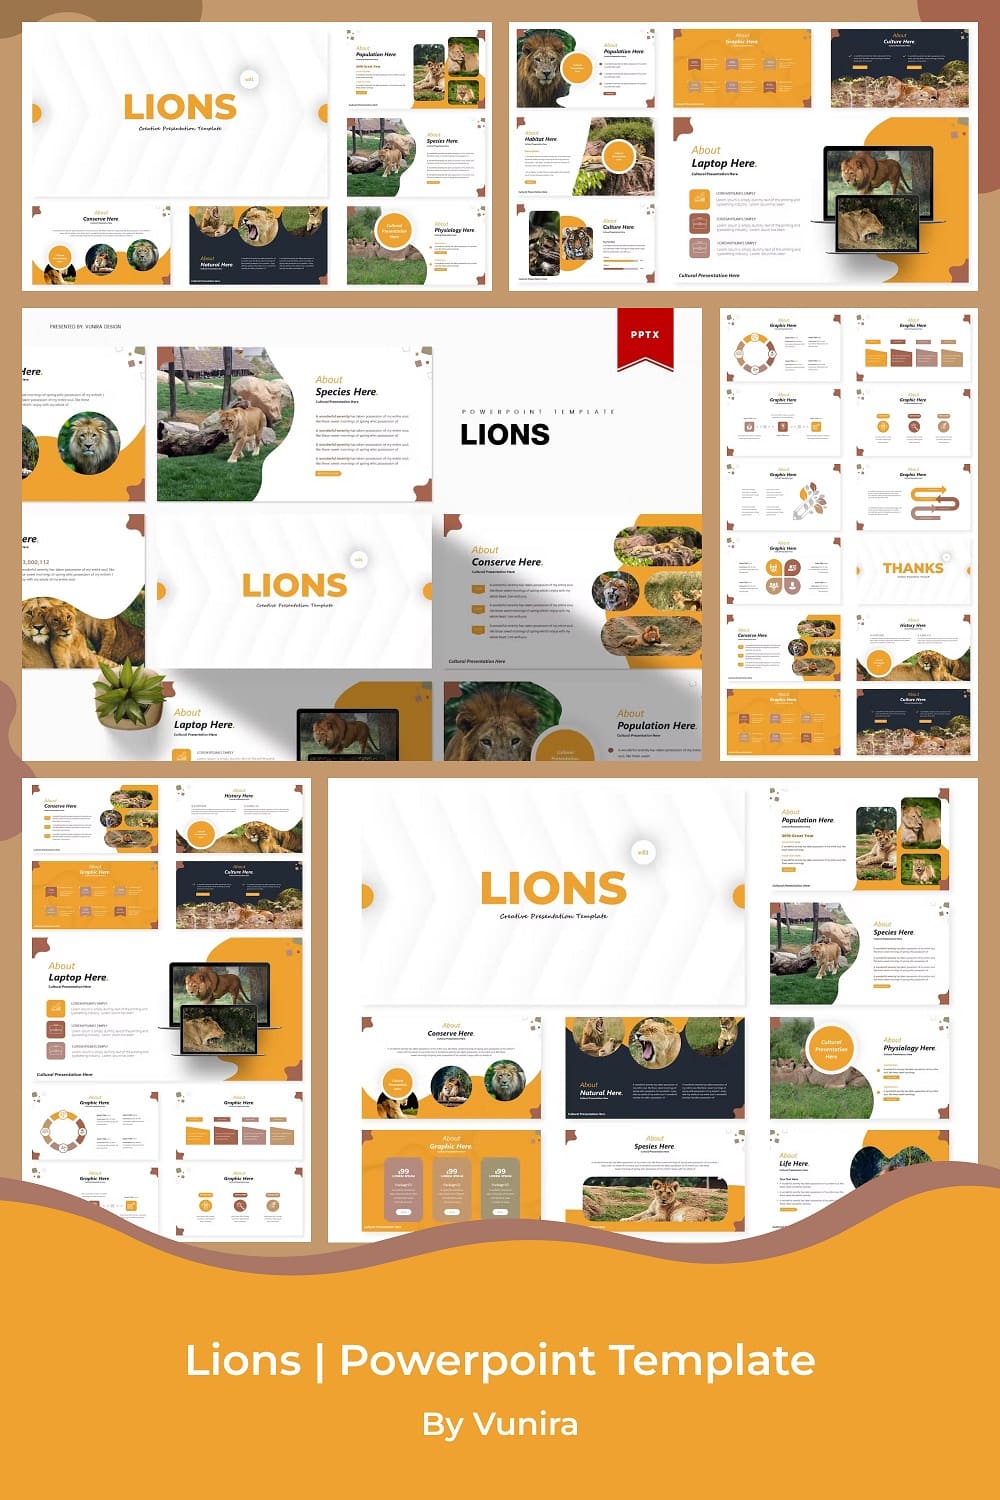 Conserve of Lions on the powerpoint template.